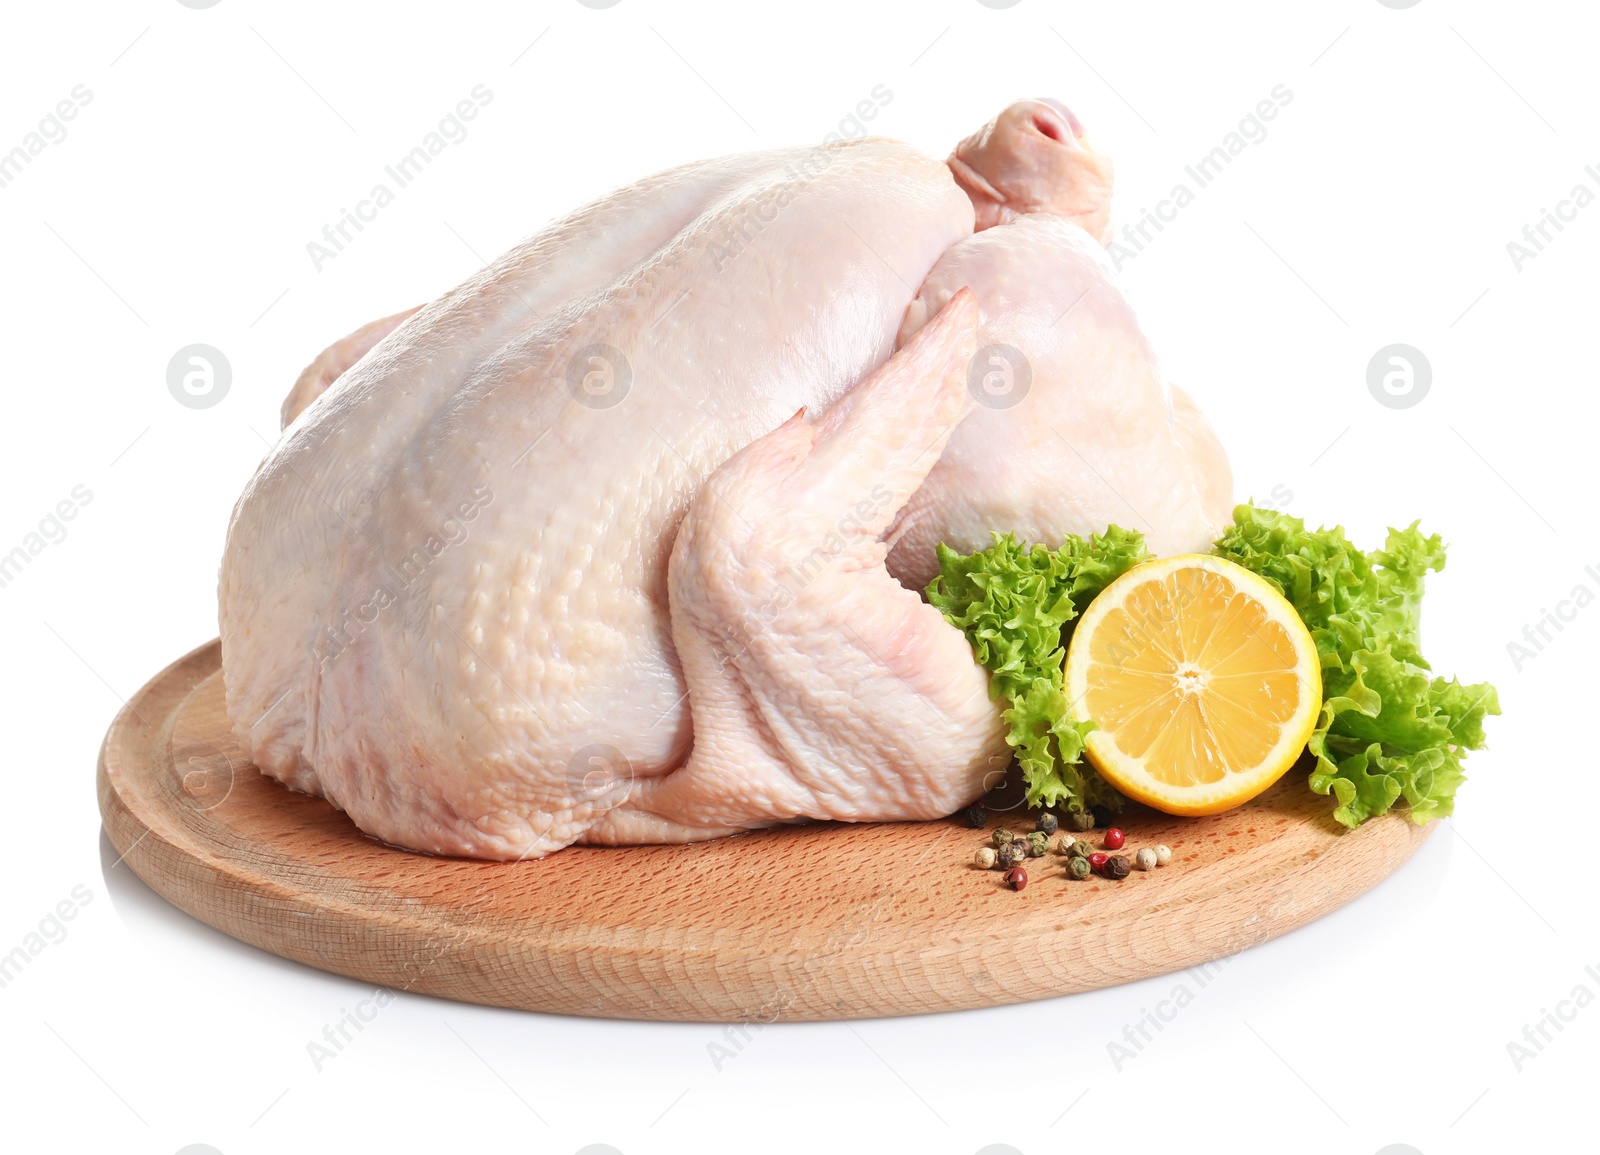 Photo of Wooden board with raw turkey and ingredients on white background